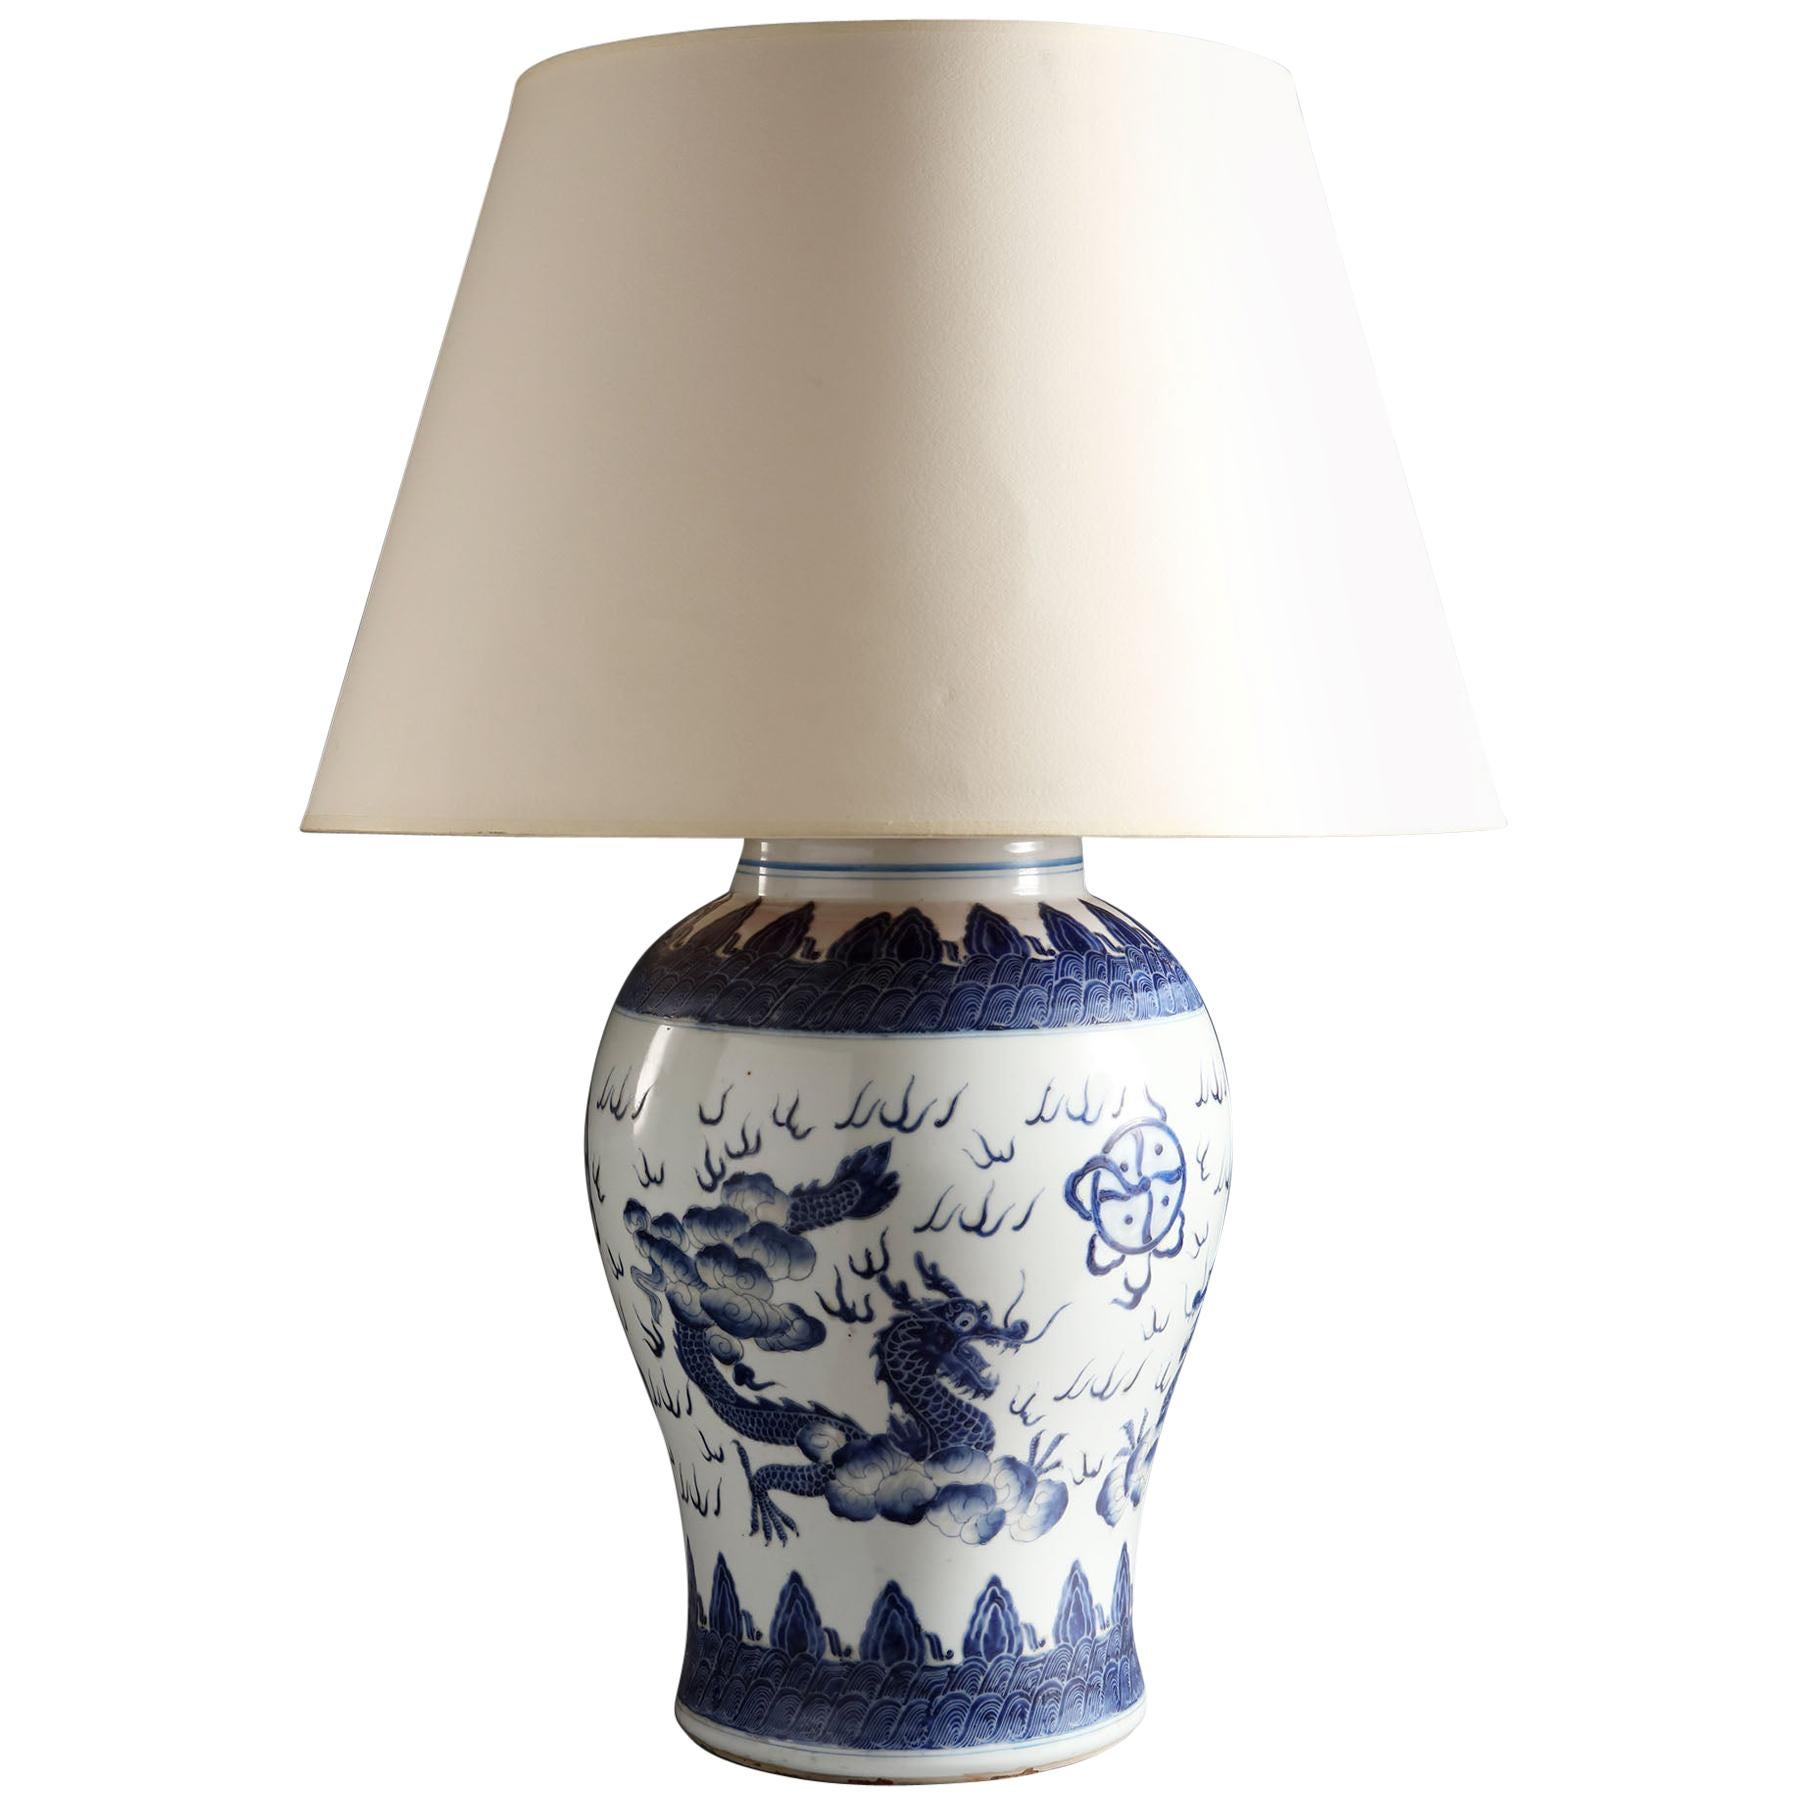 Large 19th Century Blue and White Chinese Vase as a Table Lamp